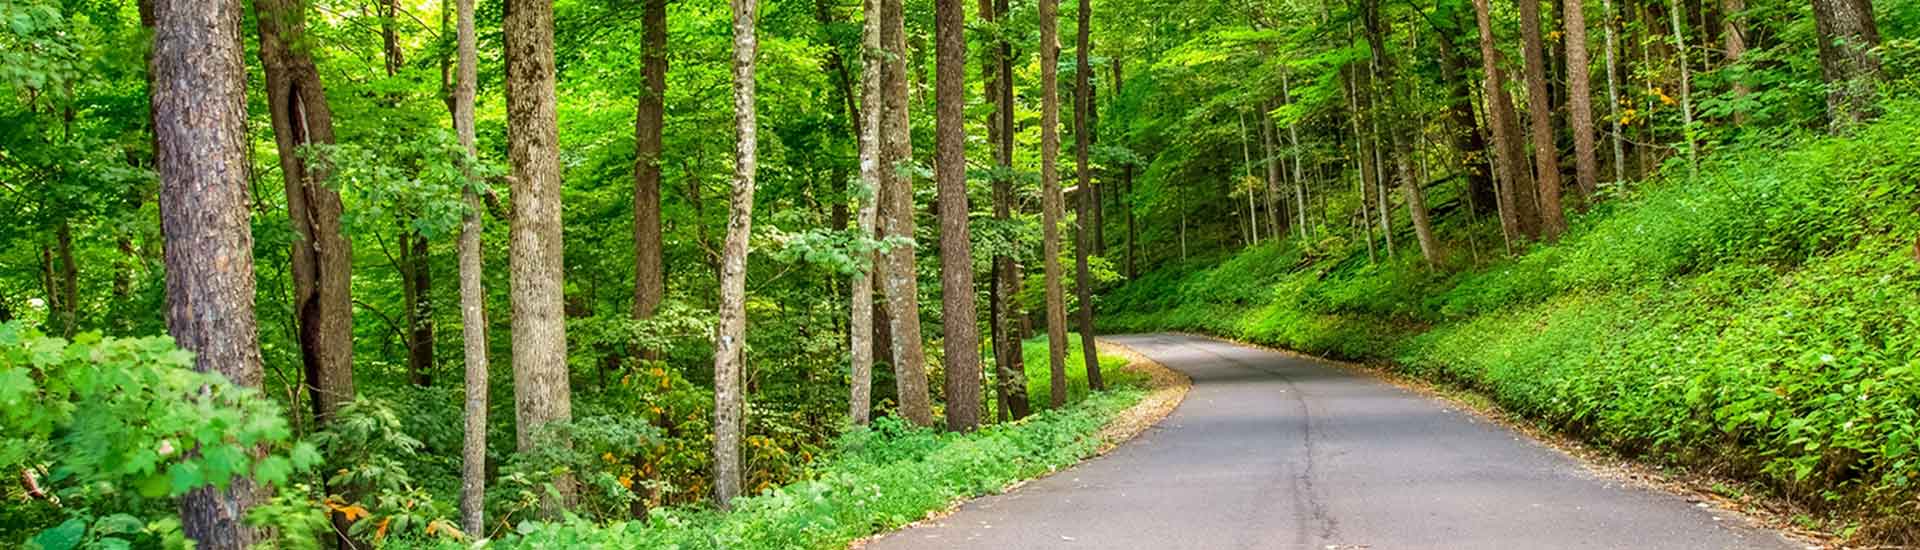 The paved, single-lane Roaring Fork Nature Trail winds one-way through heavy forest in the Smoky Mountains